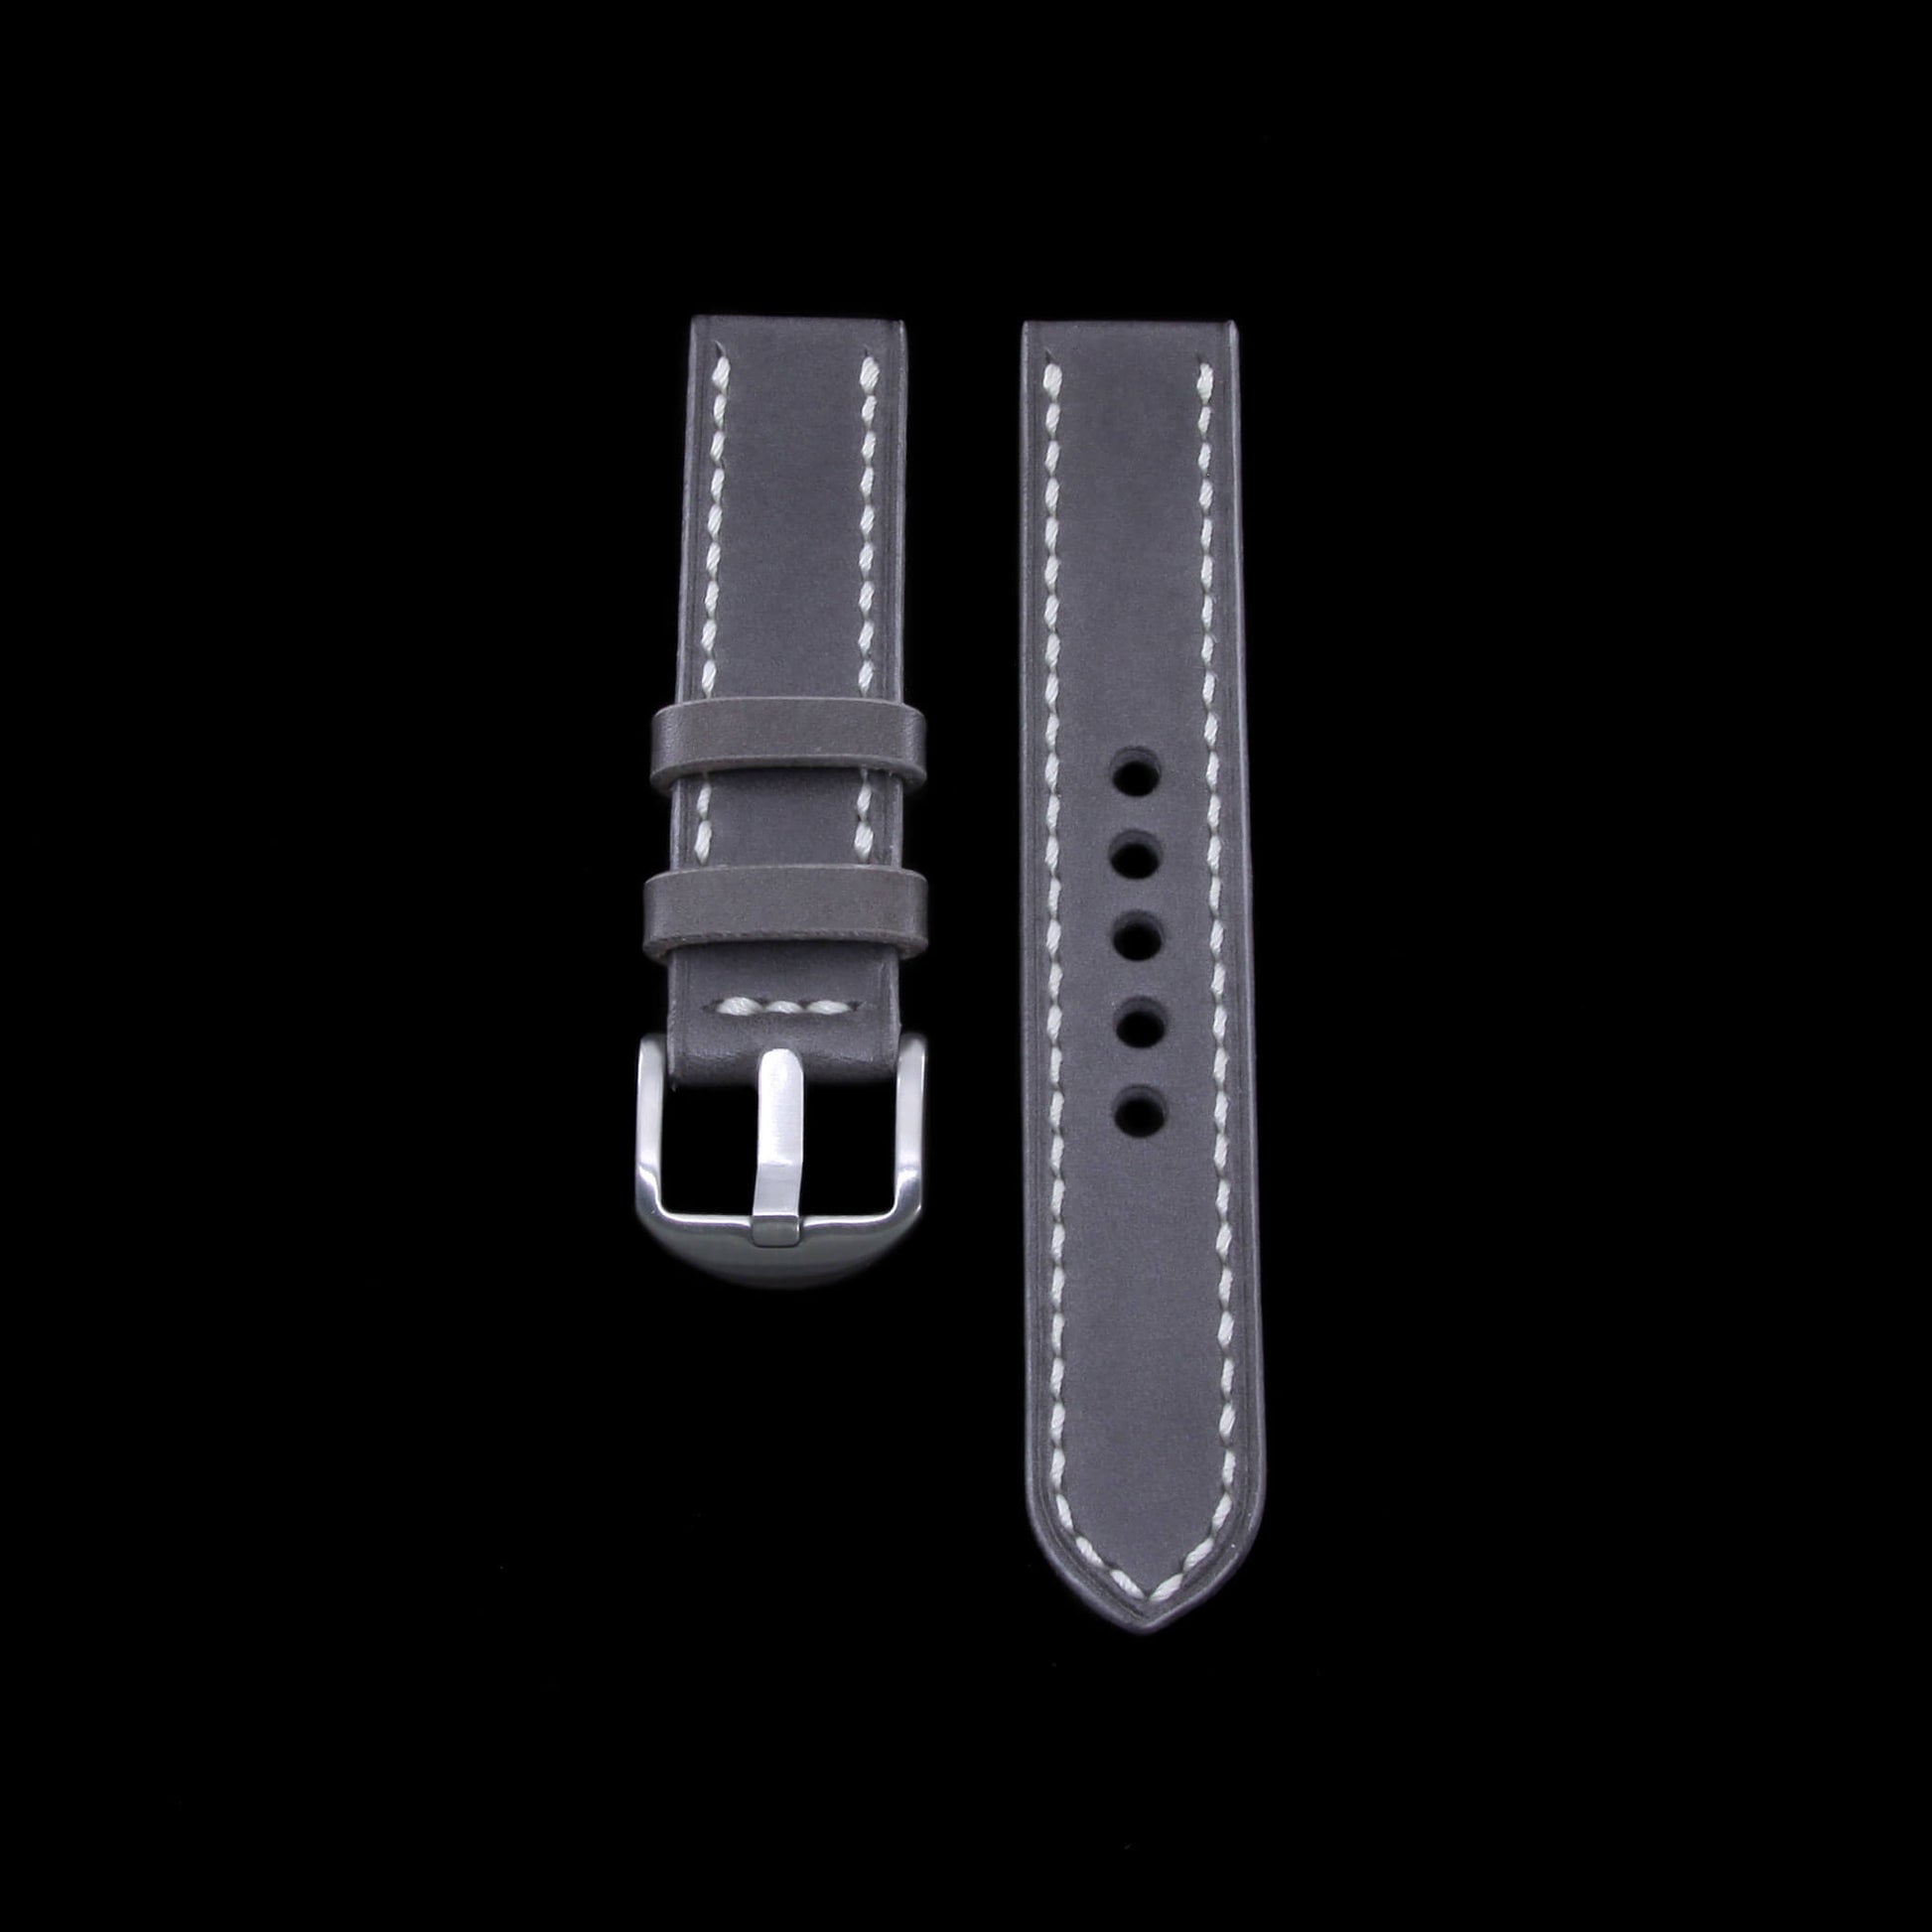 2nd View of 2-Piece Full Stitch Leather Watch Strap, made with Koala Antracite Italian veg-tanned leather by Cozy Handmade